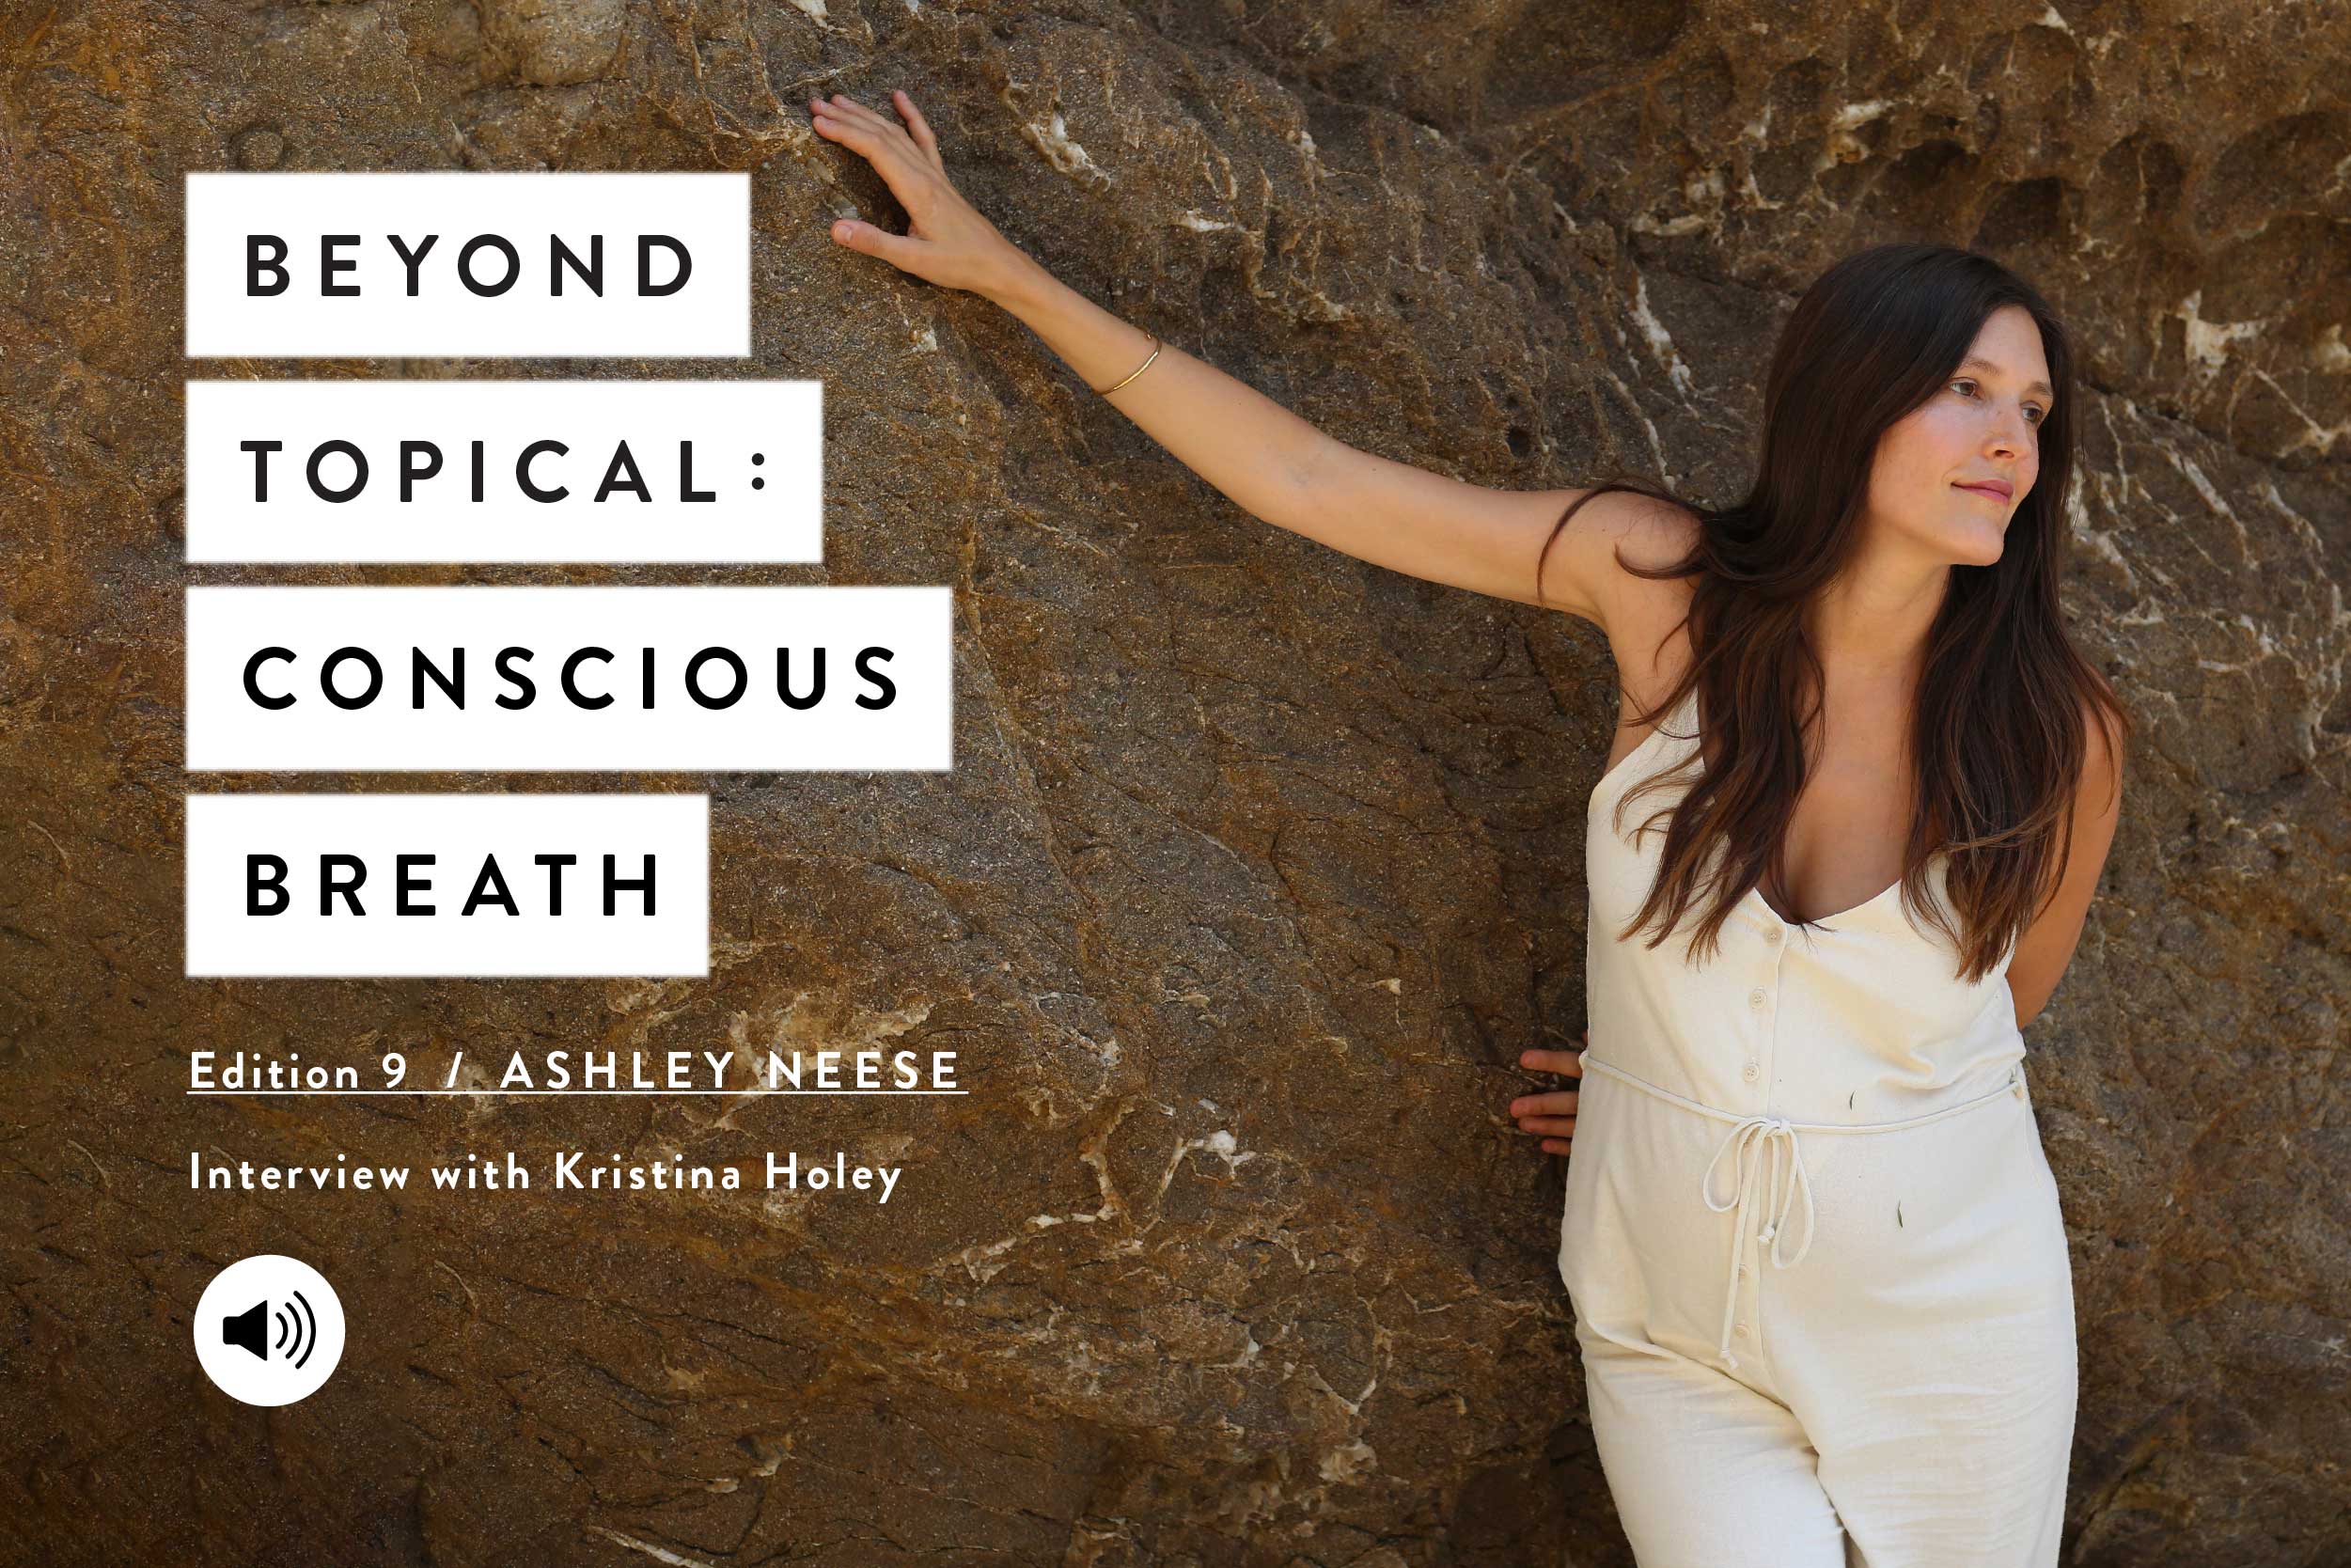 Beyond Topical: Conscious Breath with Ashley Neese